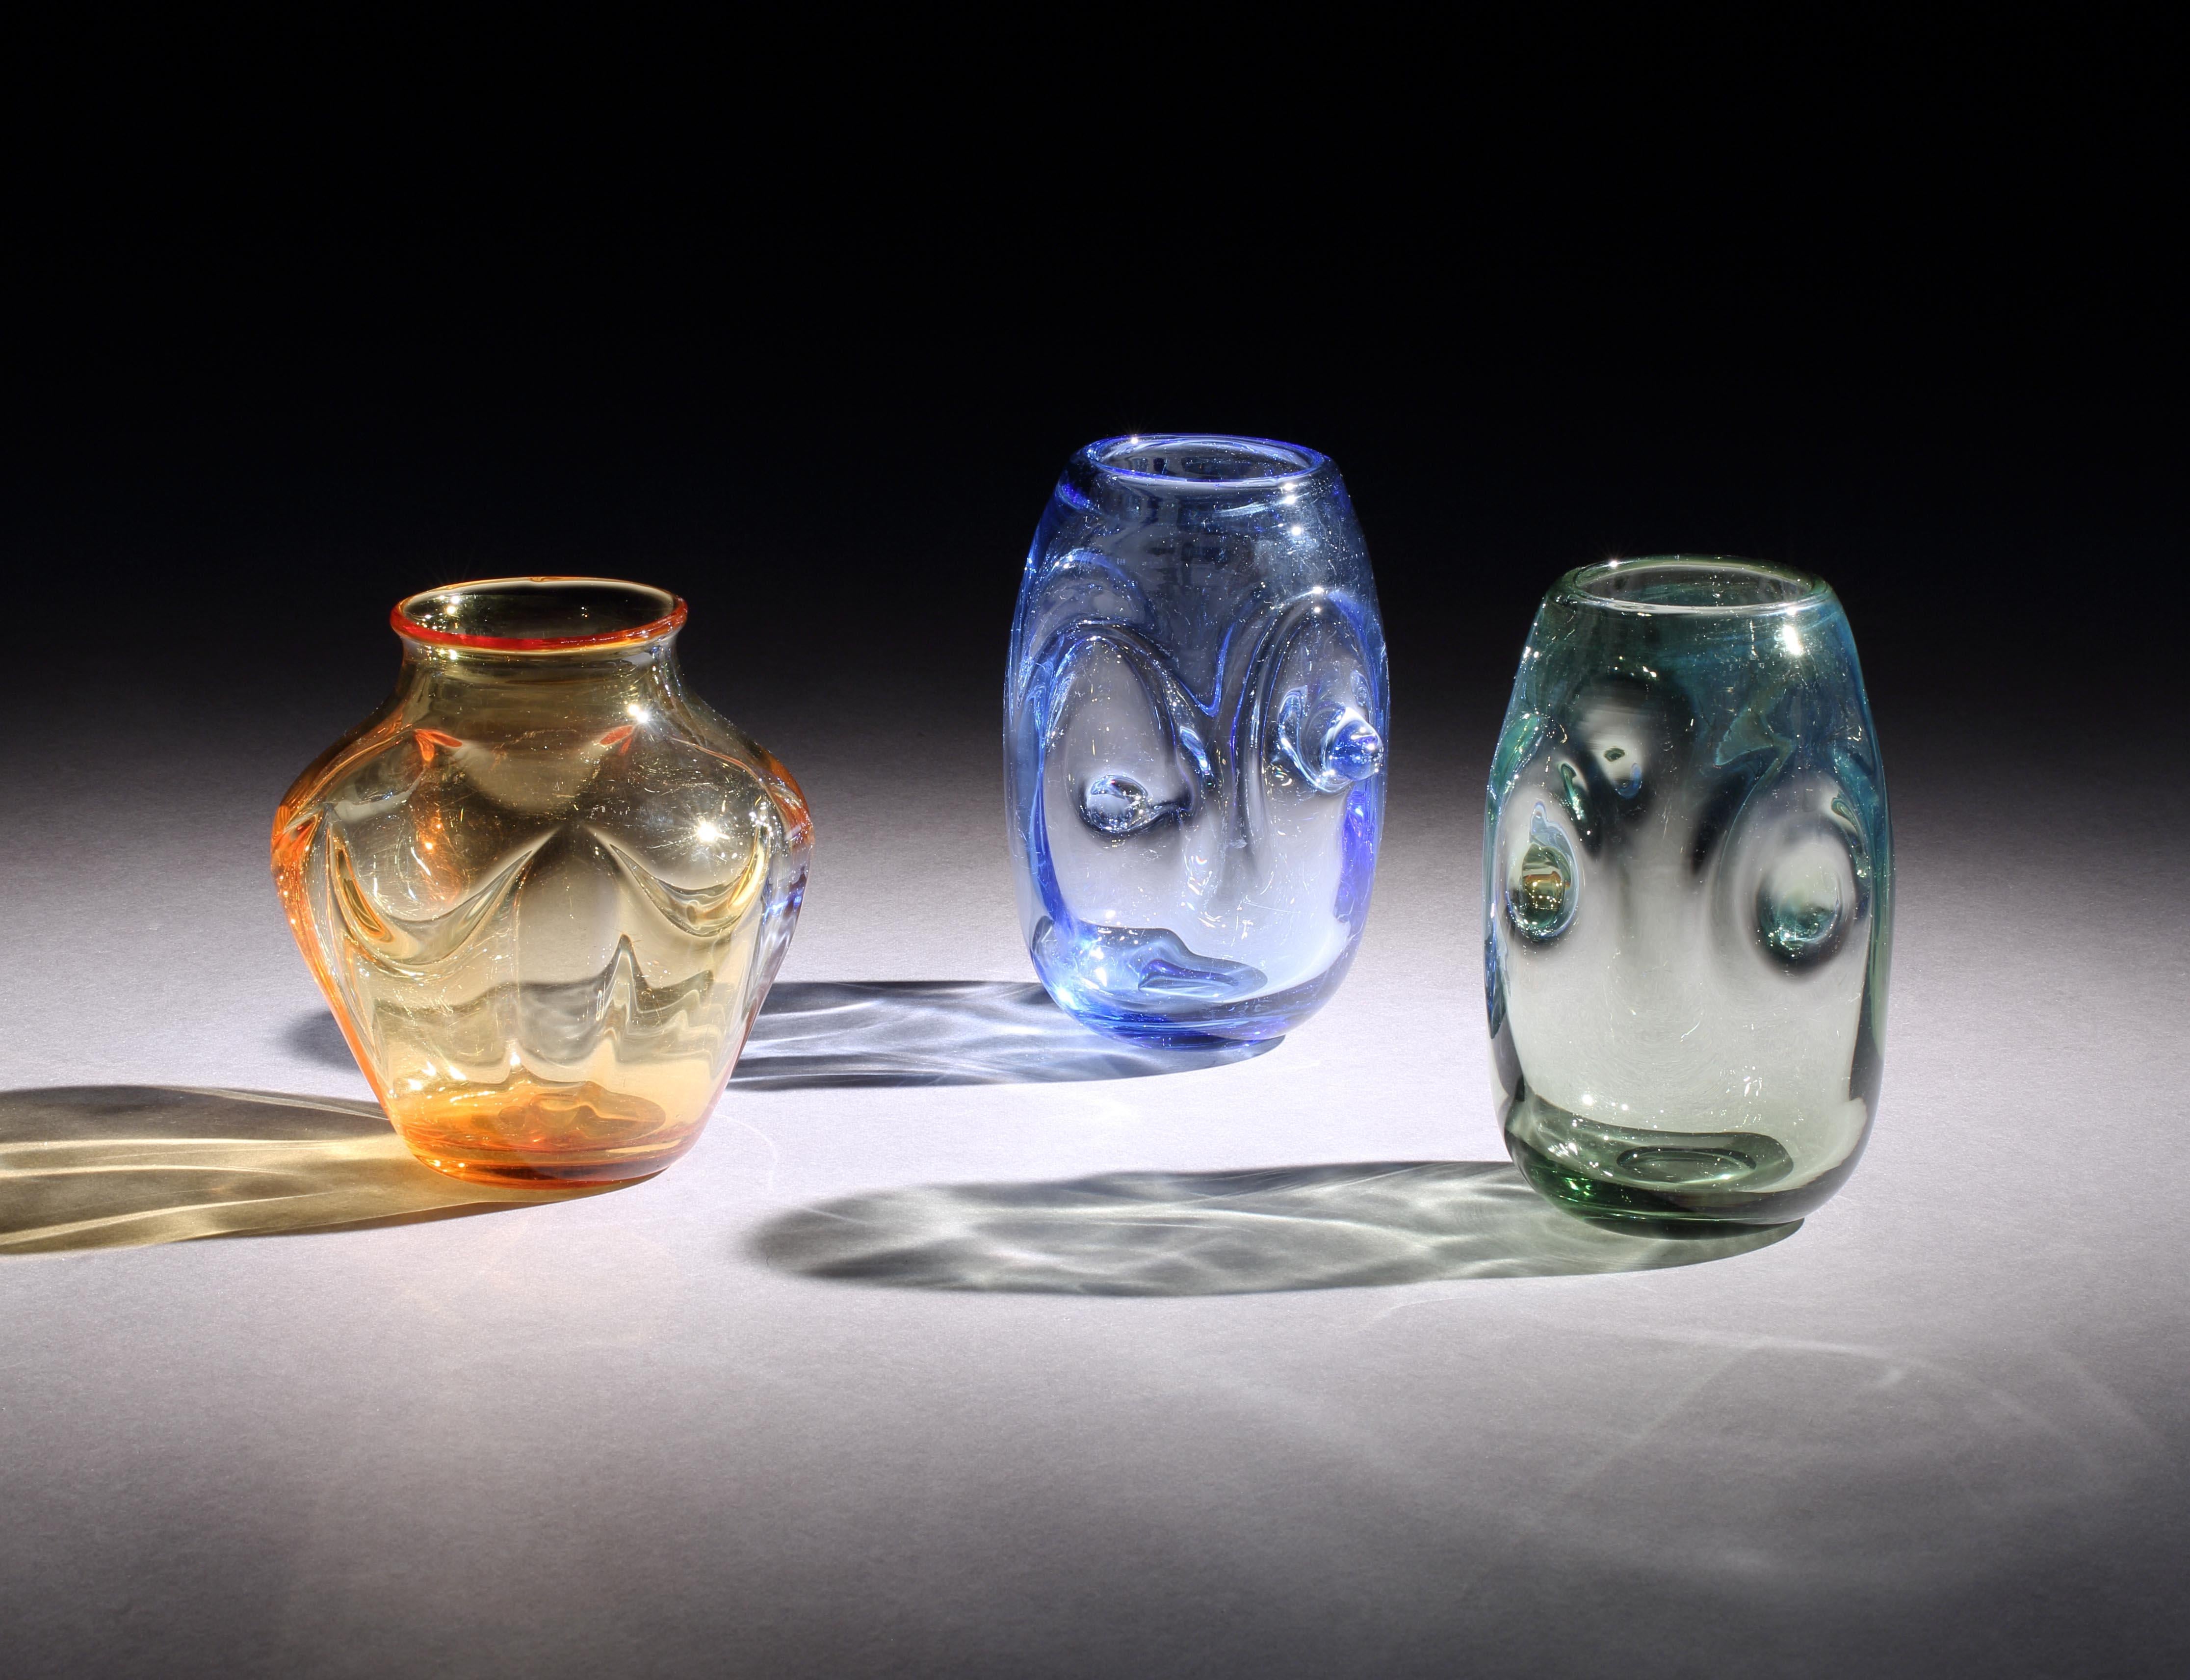 William J Wilson (b.1914) for white friars: Private collection of art deco amber, sapphire, seagreen vases; 1937 & 1938
Iconic Art Deco form, ornament & color in exceptional original condition 

- Whitefriars Glass Company was established in 1680